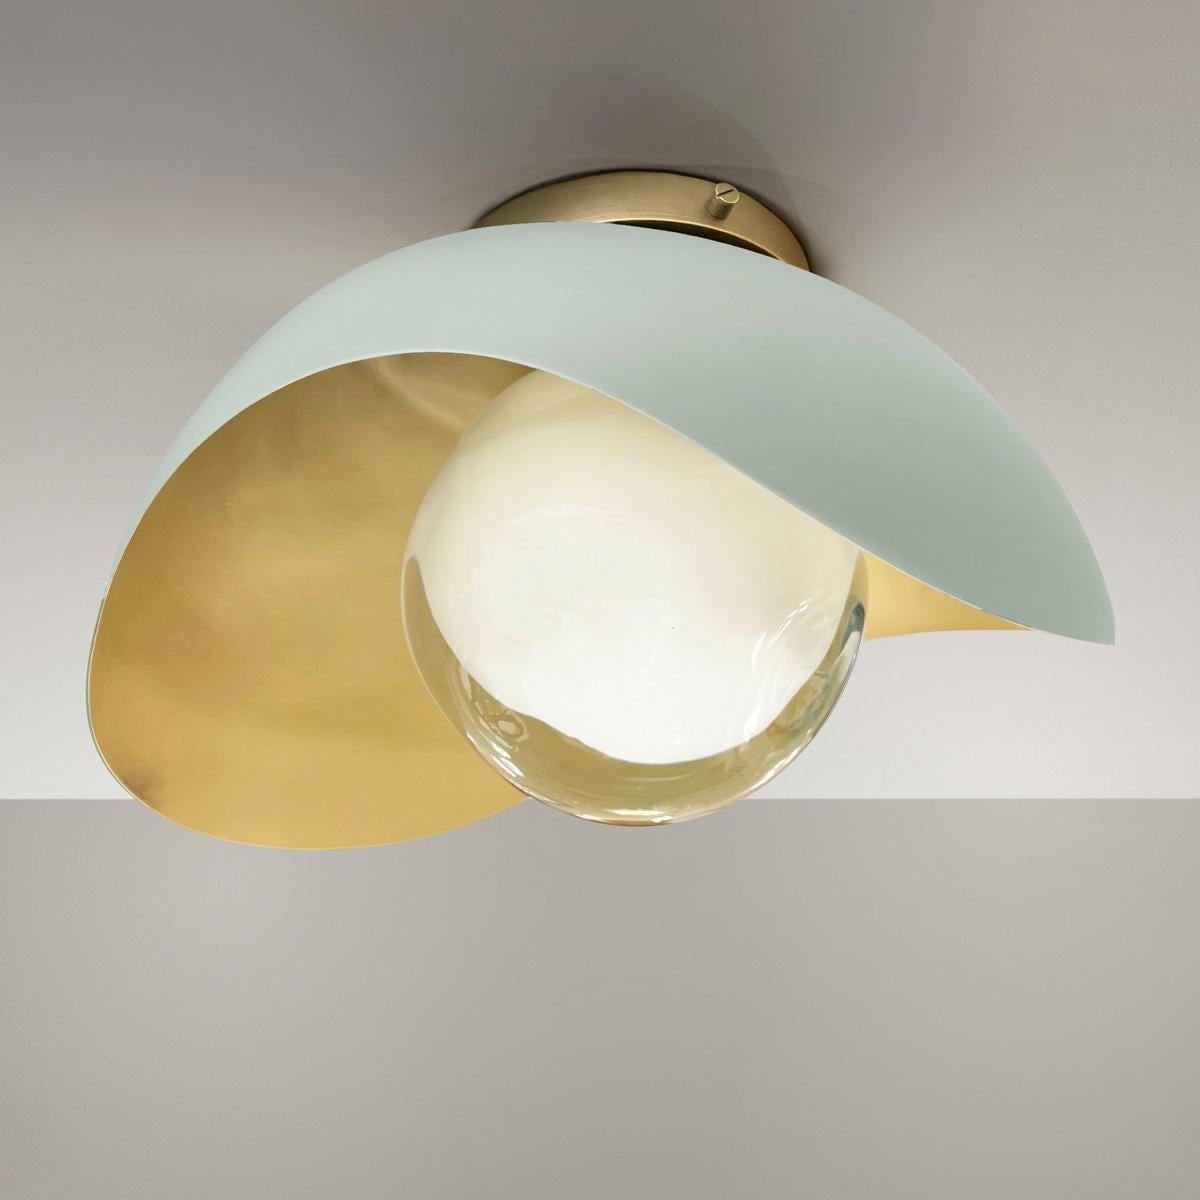 The Perla flushmount features an organic brass shell nestling our Sfera glass handblown in Tuscany. The first images show the fixture with a satin brass interior and Lerici Acqua exterior finish-subsequent pictures show it in a selection of